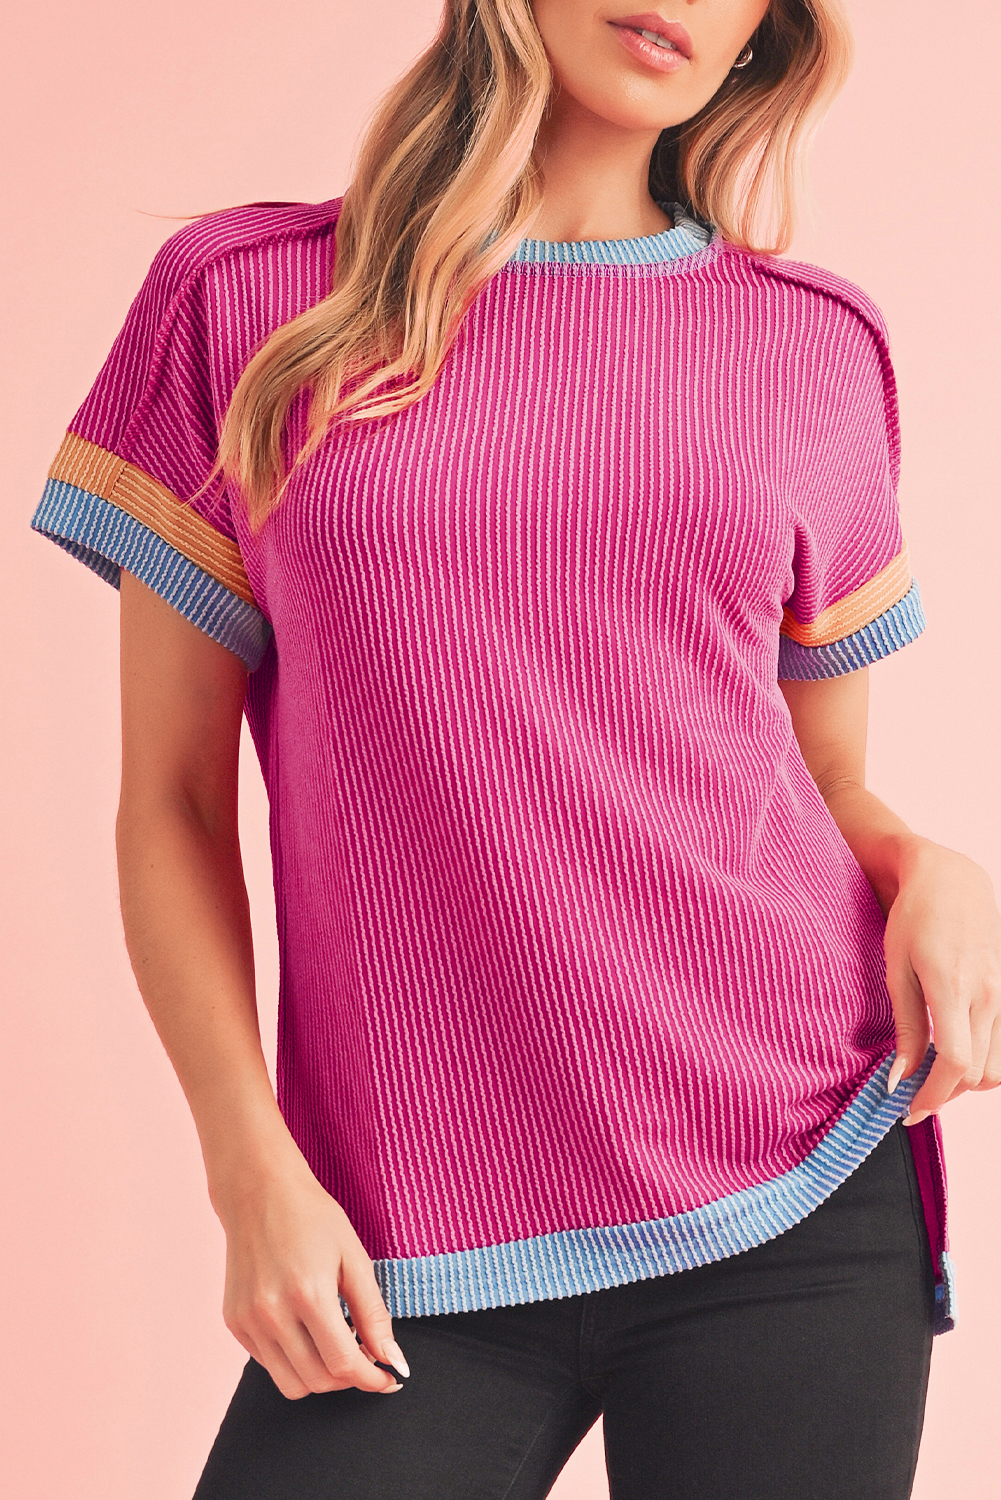 Shewin Wholesale Dropshipping Bright Pink Textured Contrast Color Round Neck T SHIRT